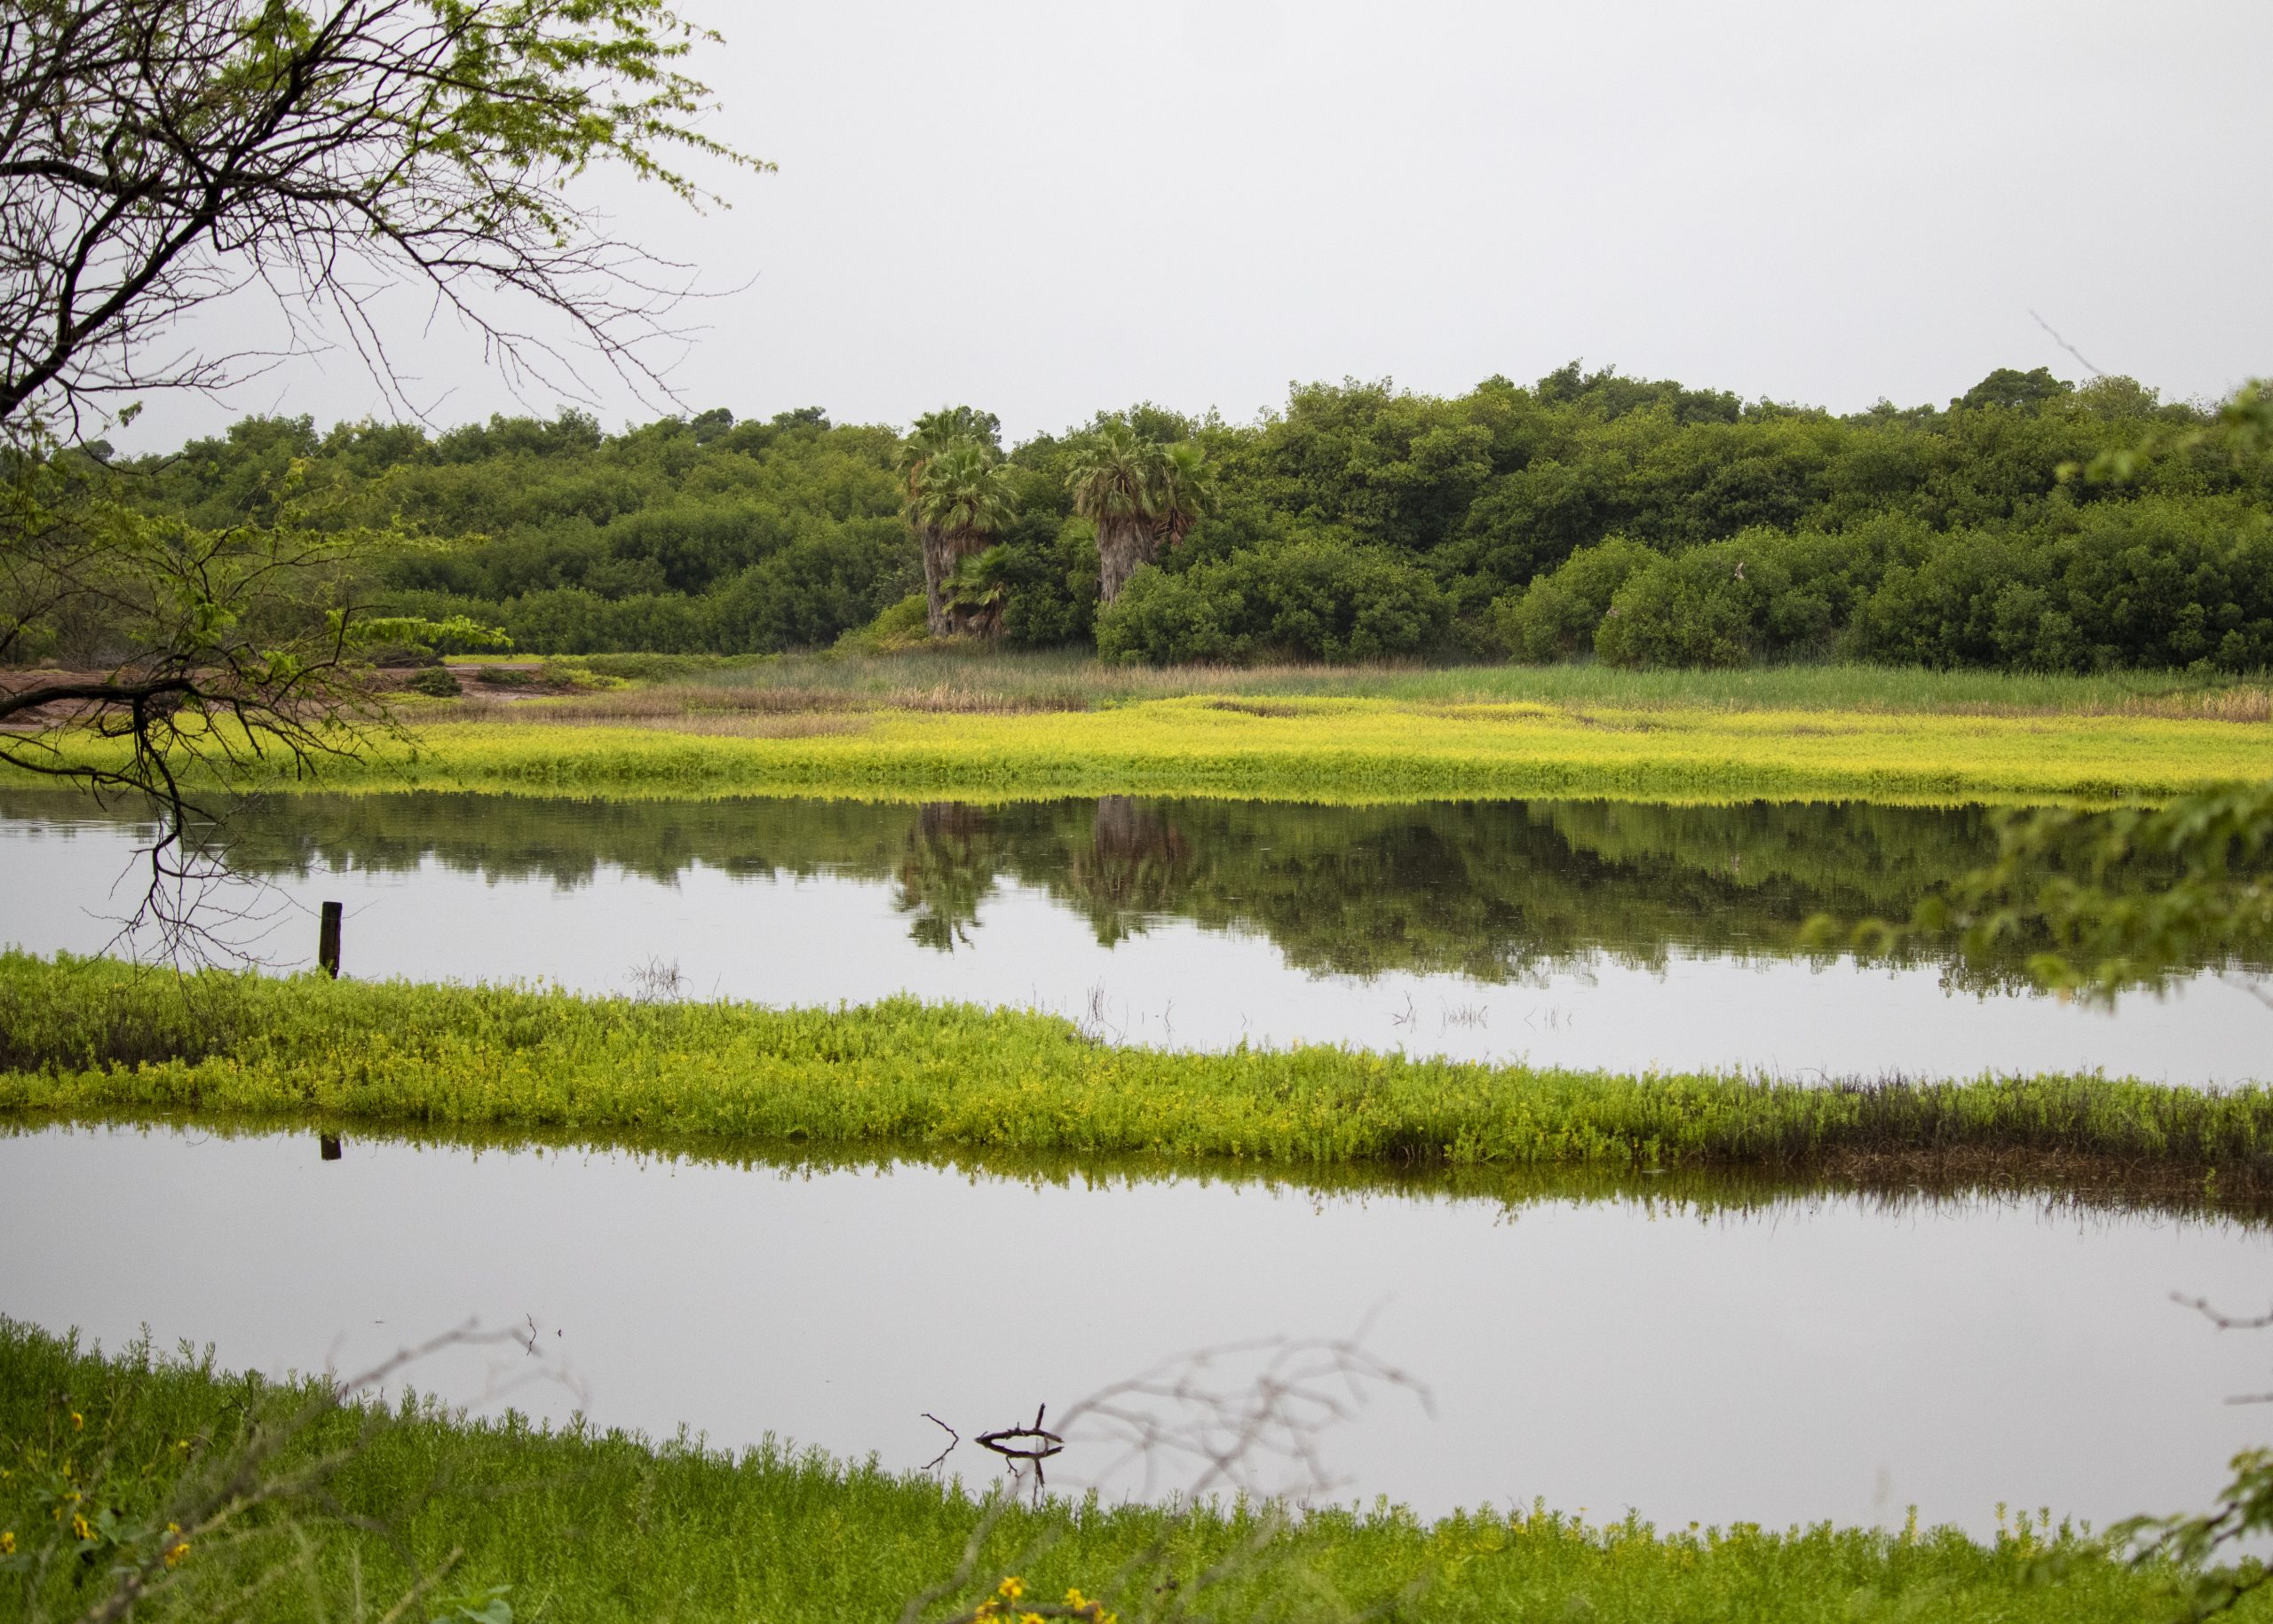 An image of Pouhala Marsh